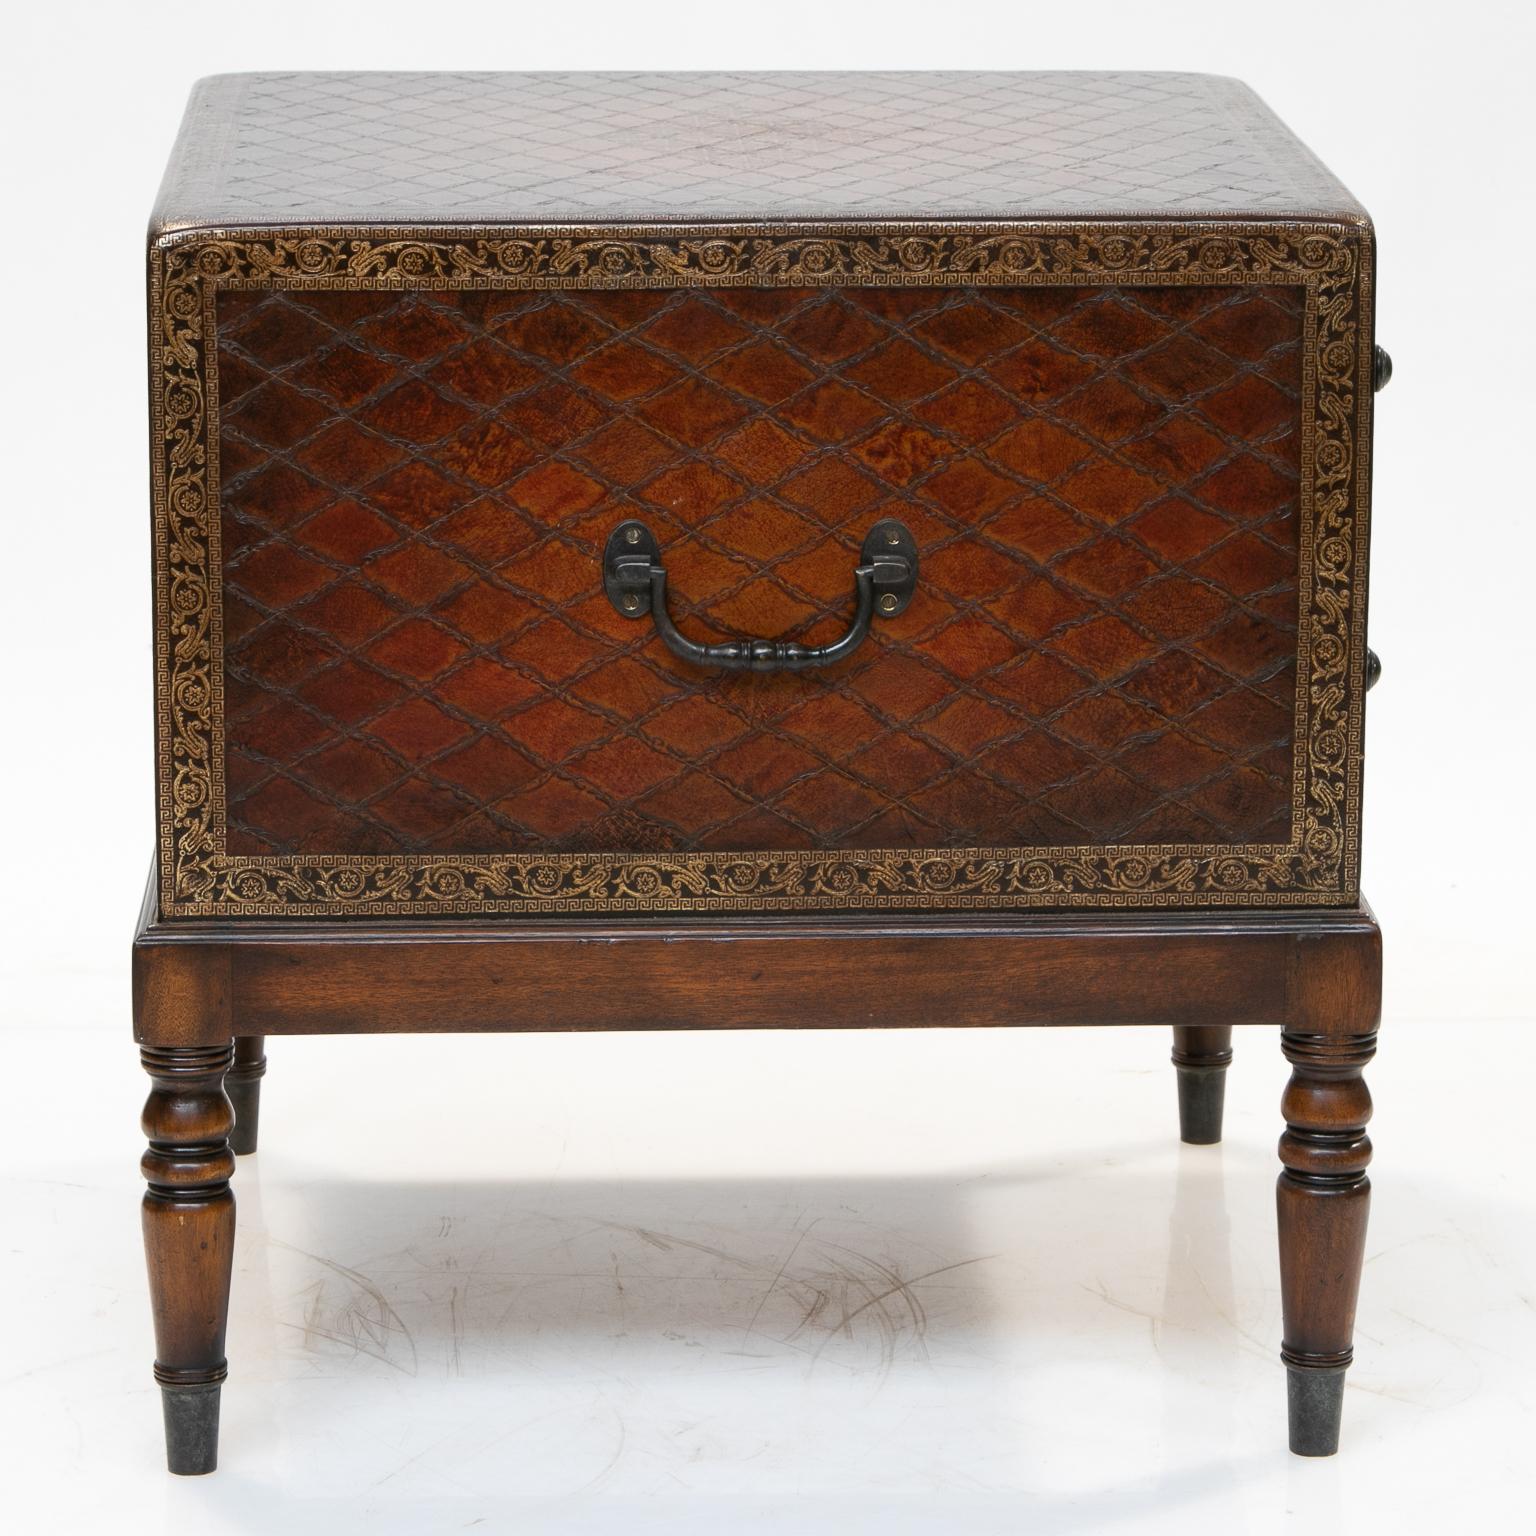 British Colonial Embossed Leather Chest on Stand